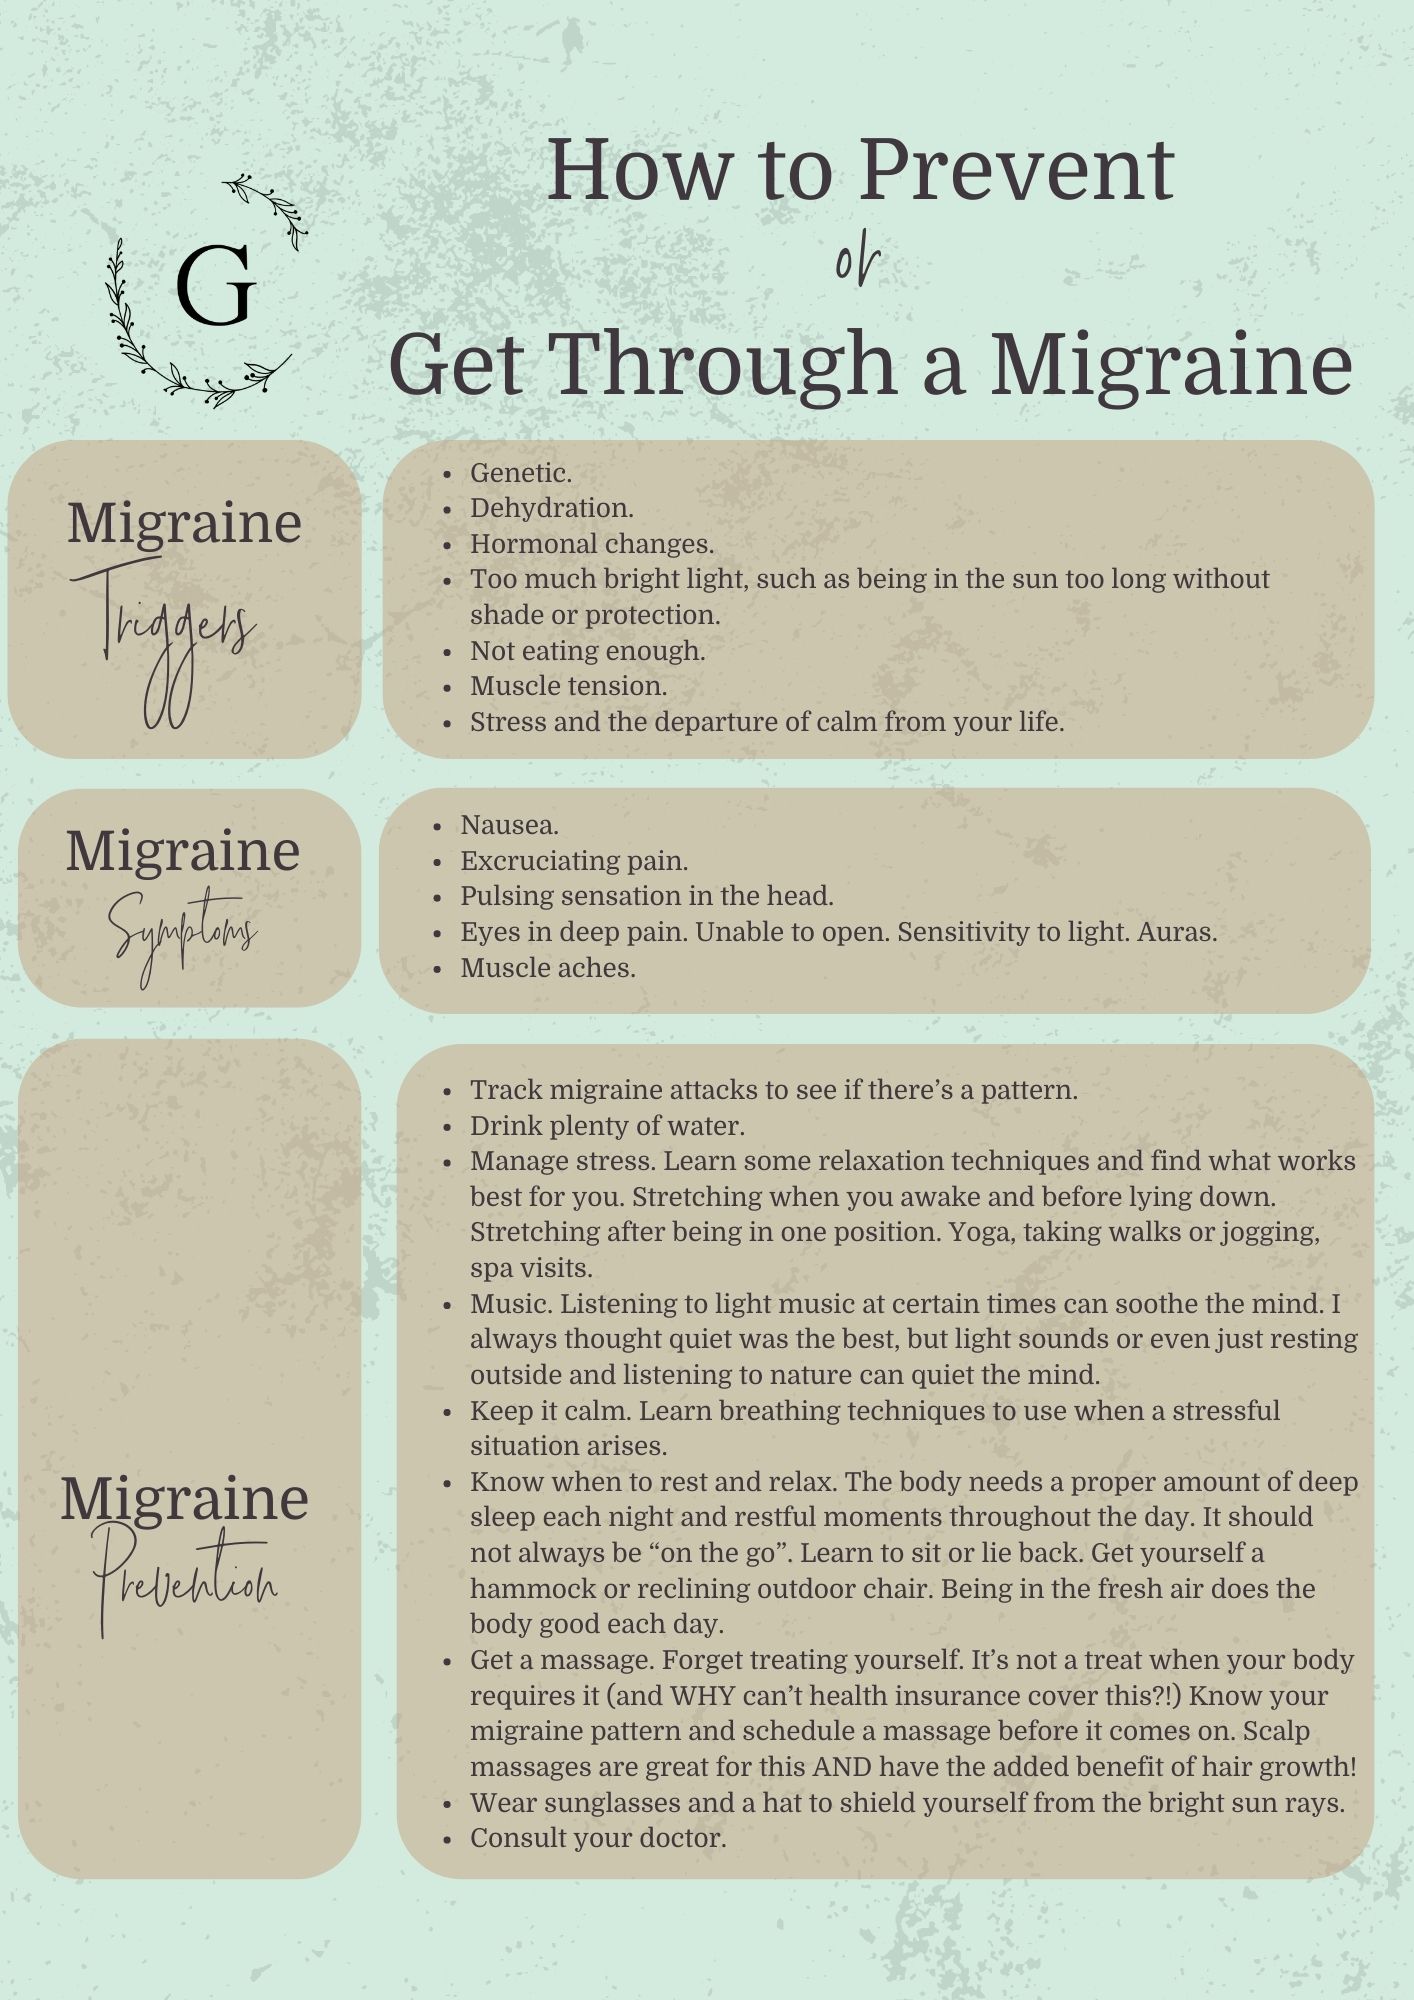 informative chart about how to prevent oto get through a migraine